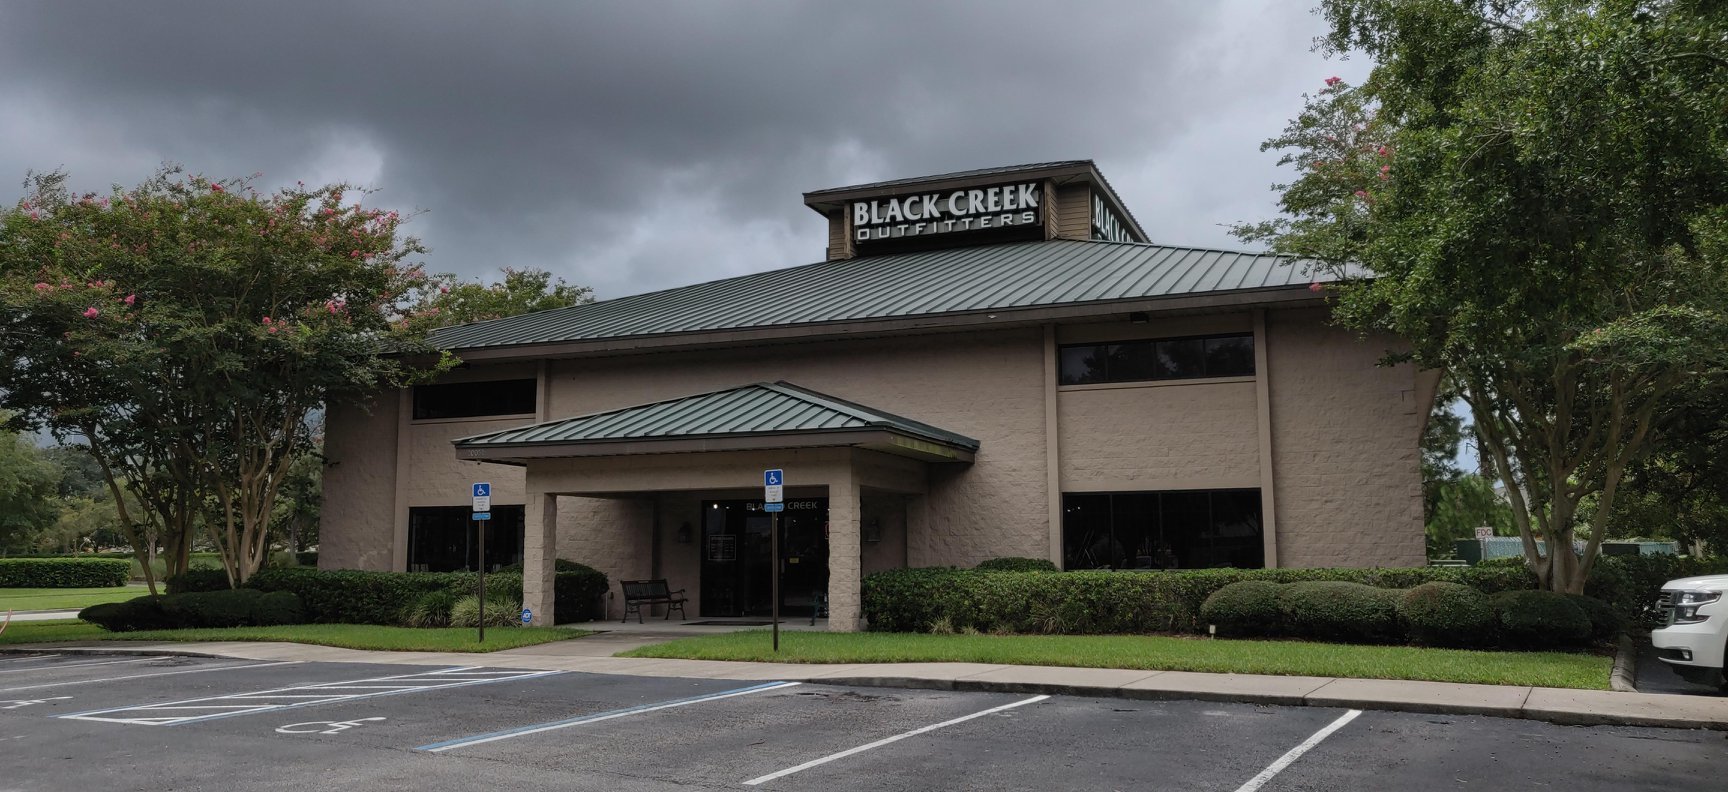 Black Creek Outfitters opened its store at 10051 Skinner Lake Drive in 1997.